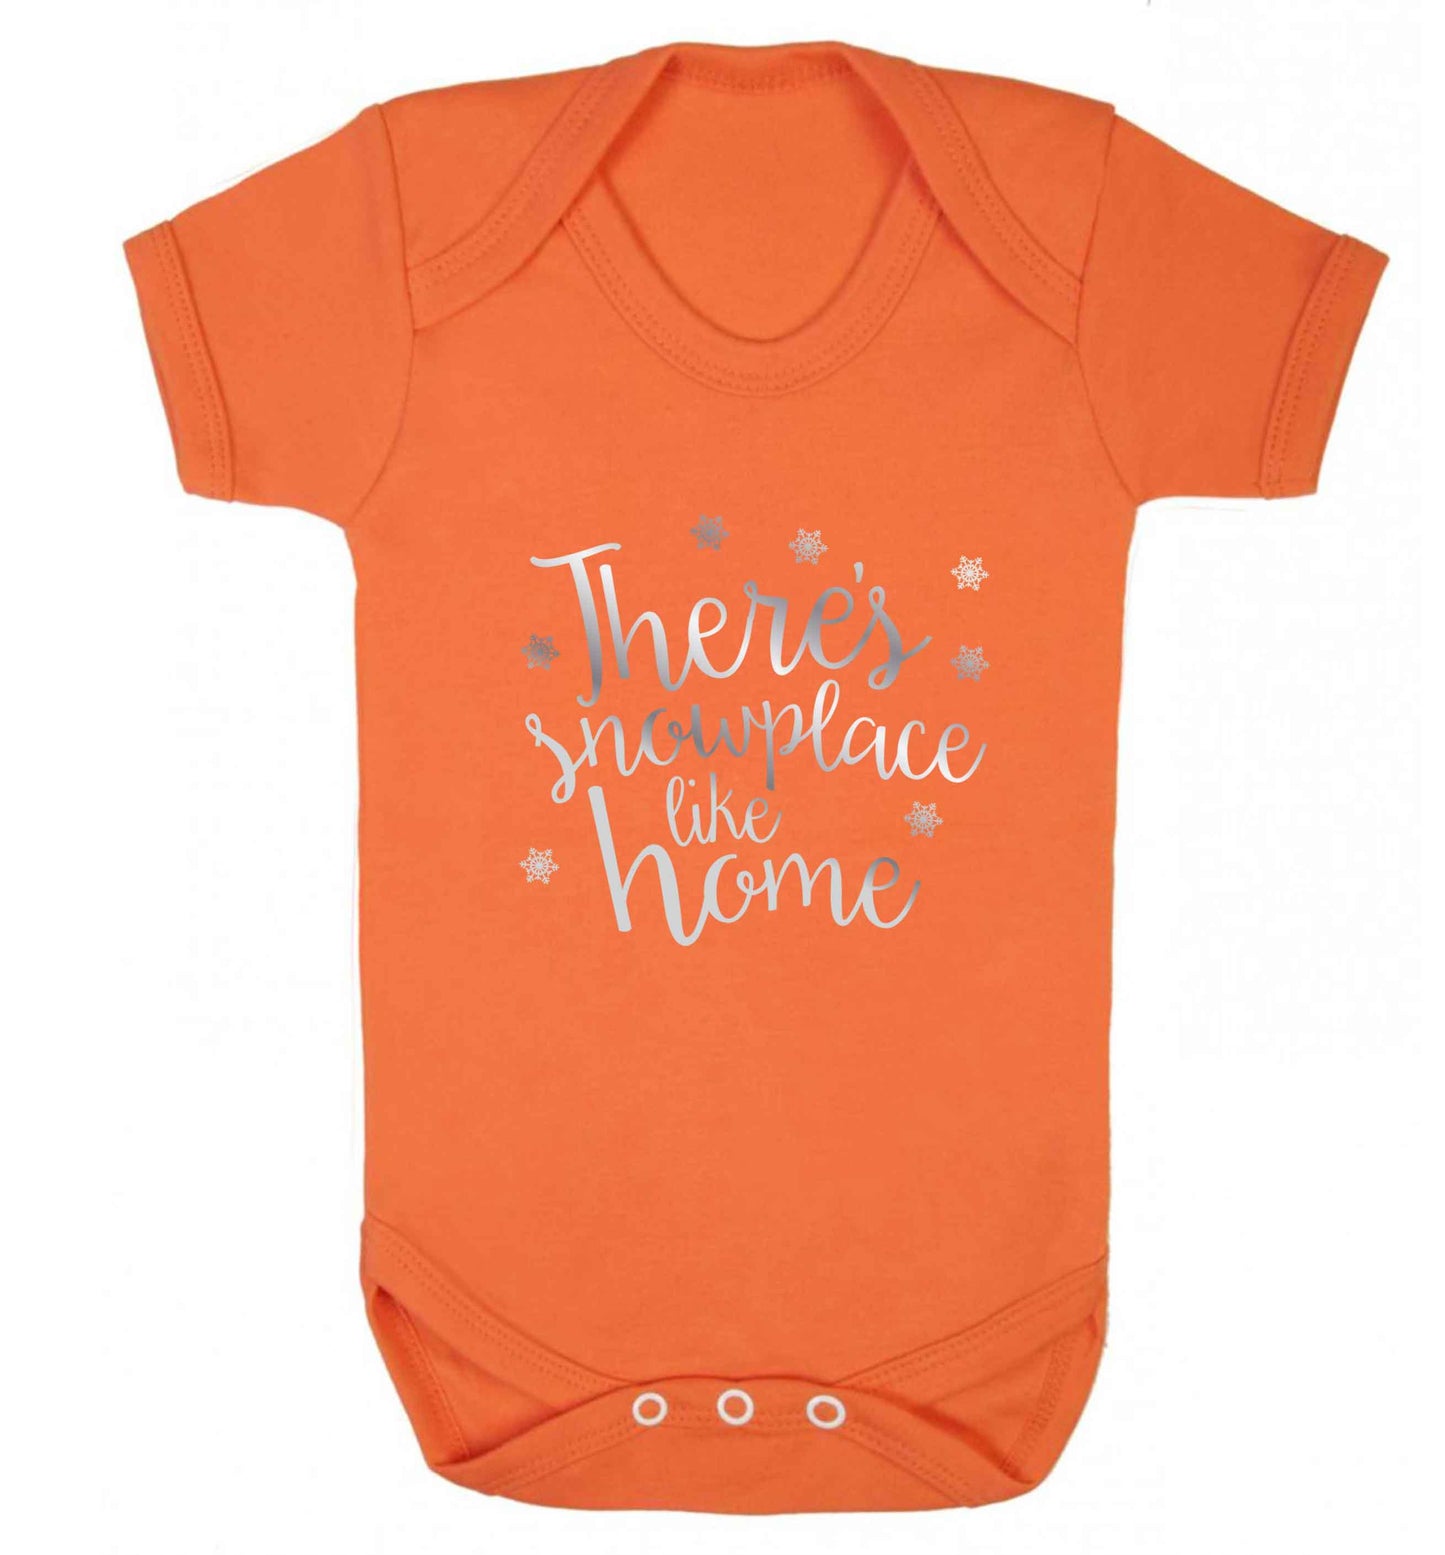 There's snowplace like home - metallic silver baby vest orange 18-24 months